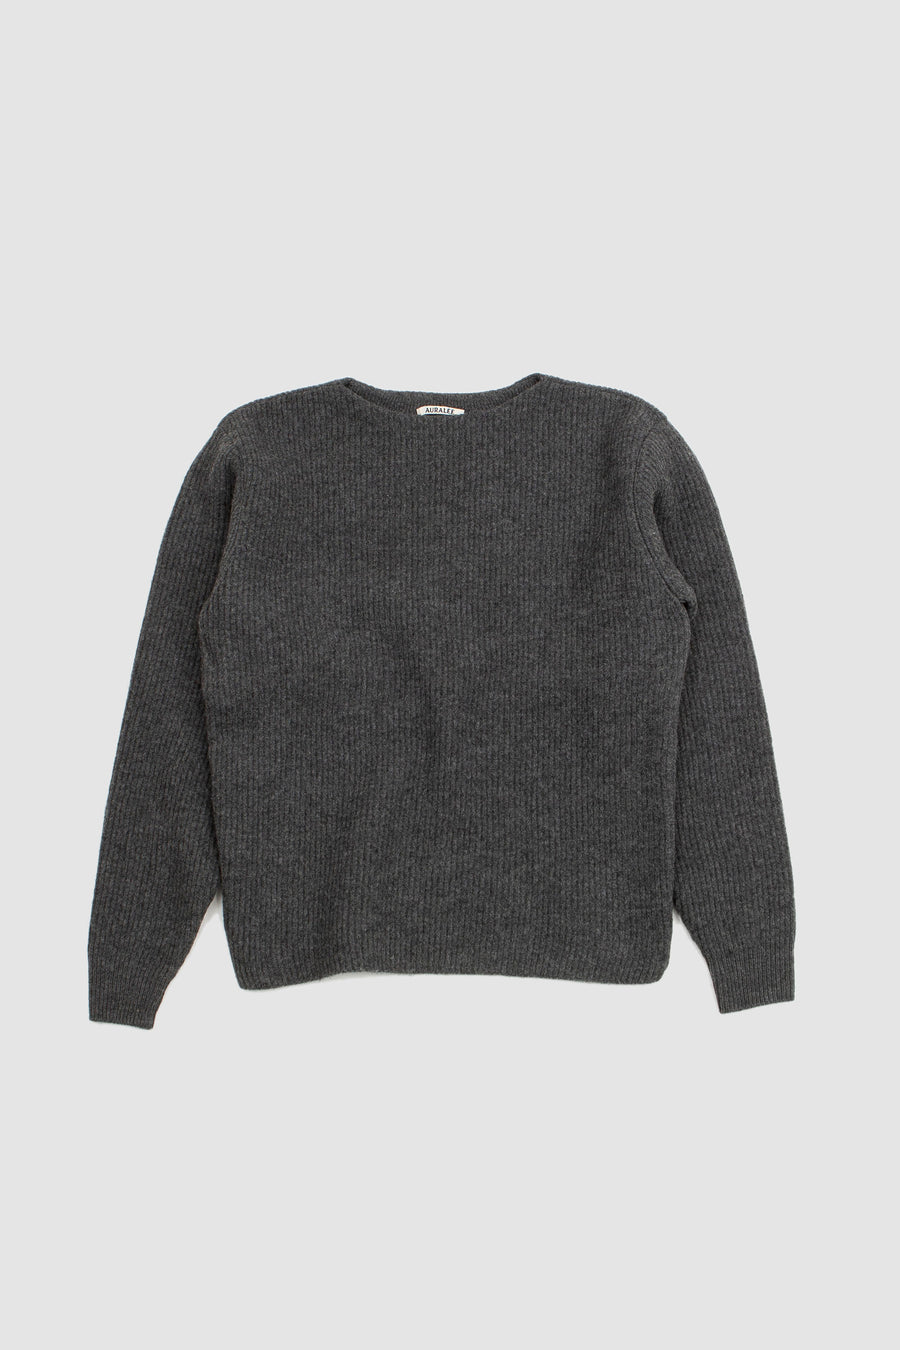 The Milano Deconstructed Knit Swazer - Grey Merino Blend Sweater